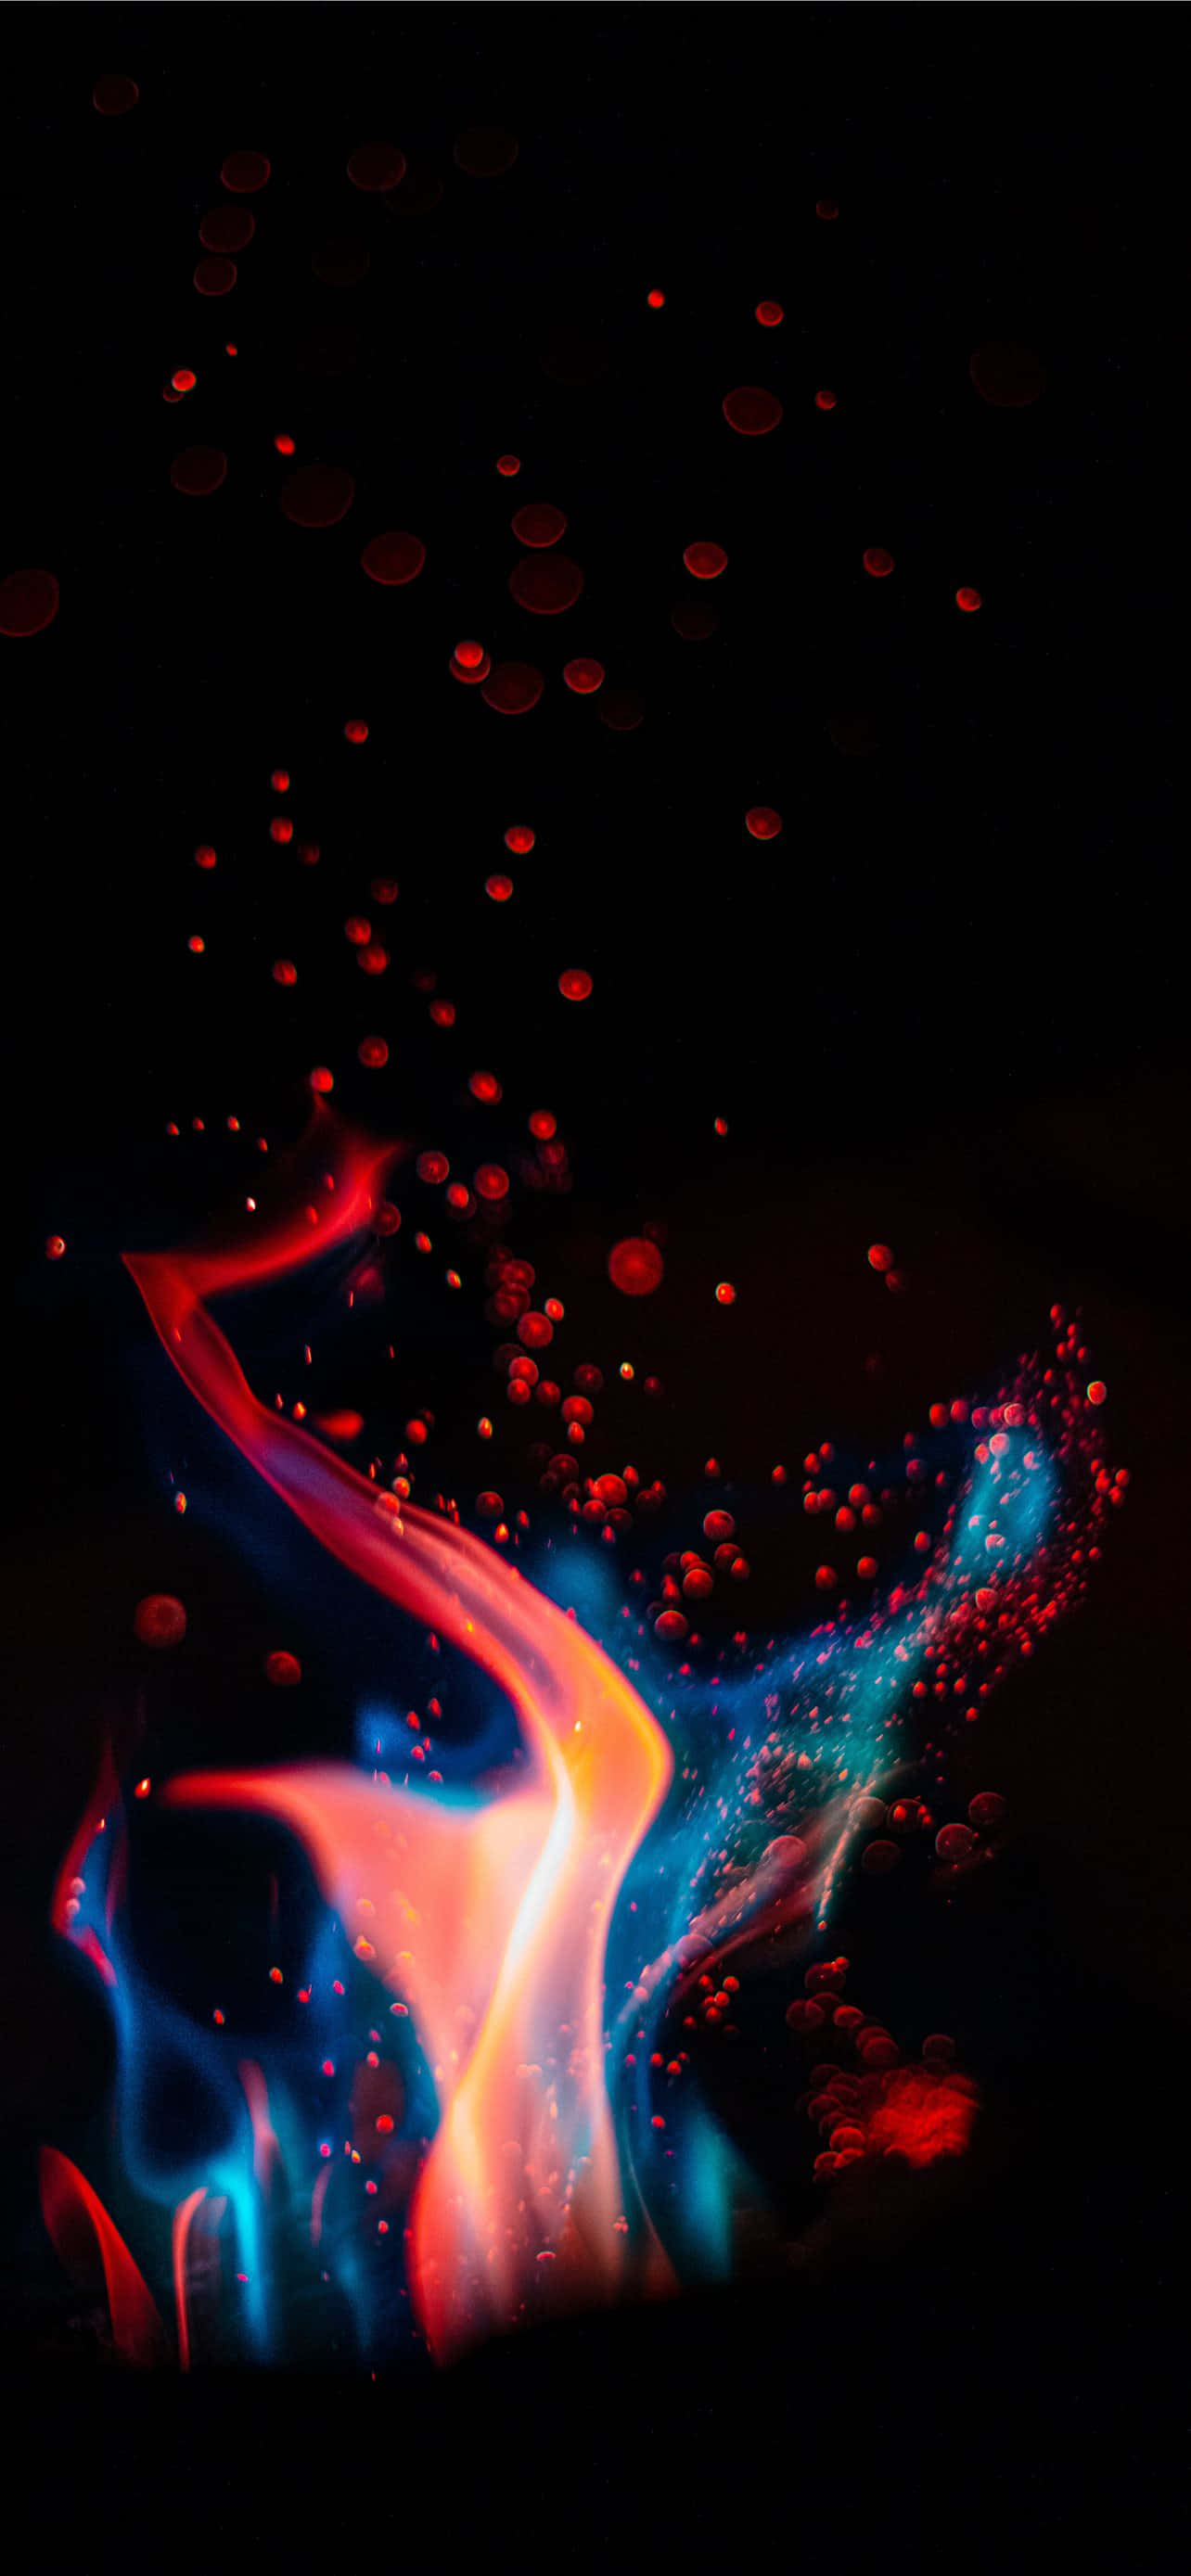 Experience the beautiful hues of red and blue fire Wallpaper